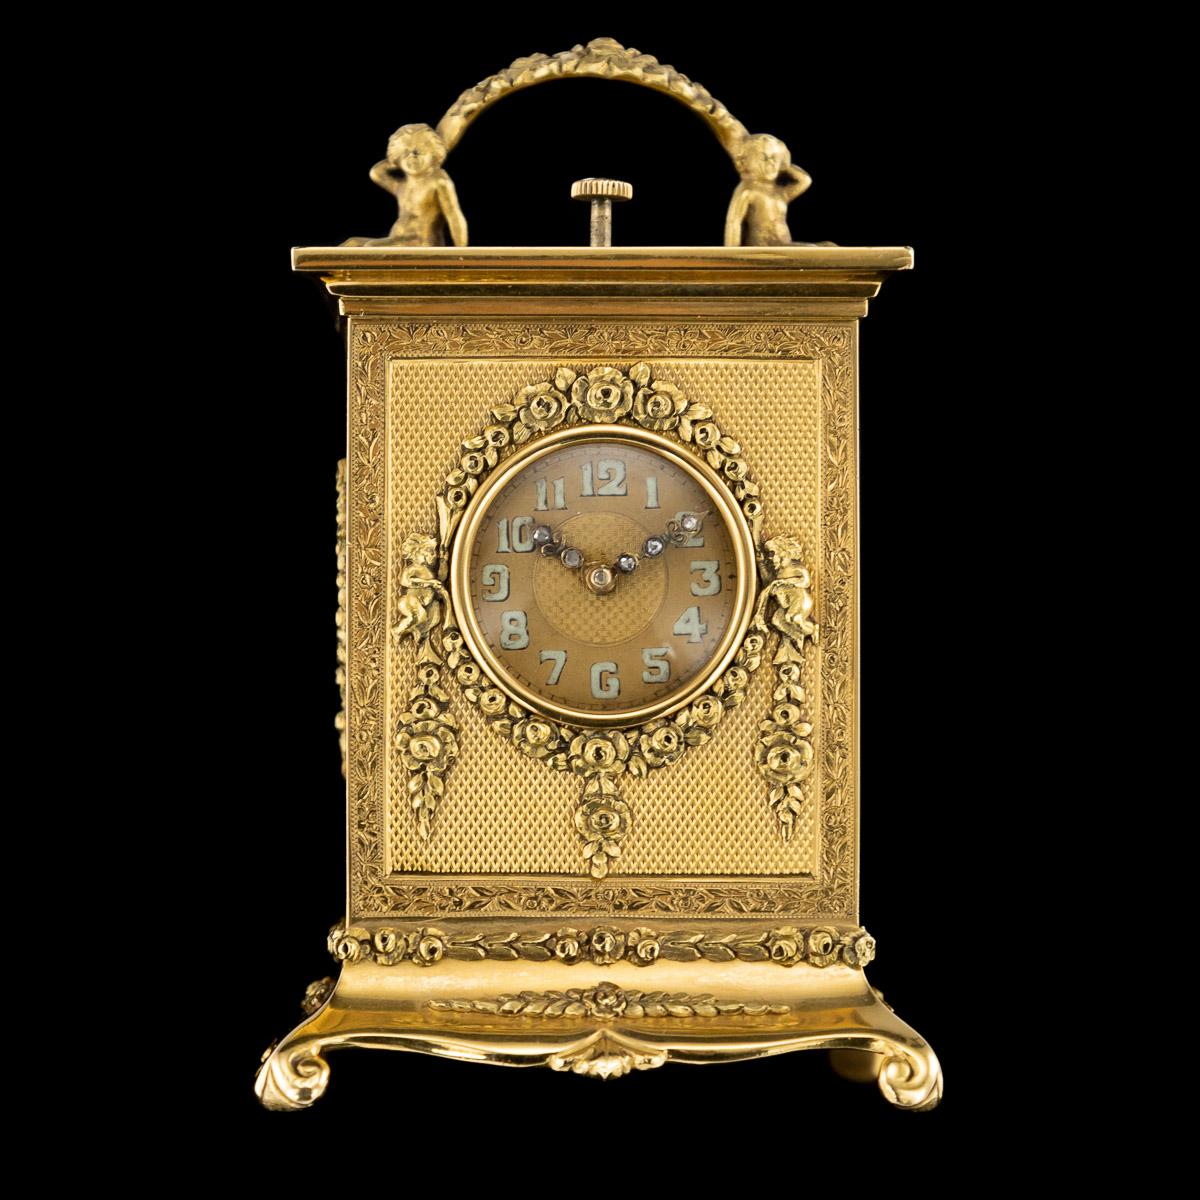 Antique 20th century English miniature 18-karat gold, quarter repeating carriage clock, round dial set with luminescent numerals and old-cut diamond hands, the 18-carat solid gold case decorated with engine-turned panels and applied with putti and